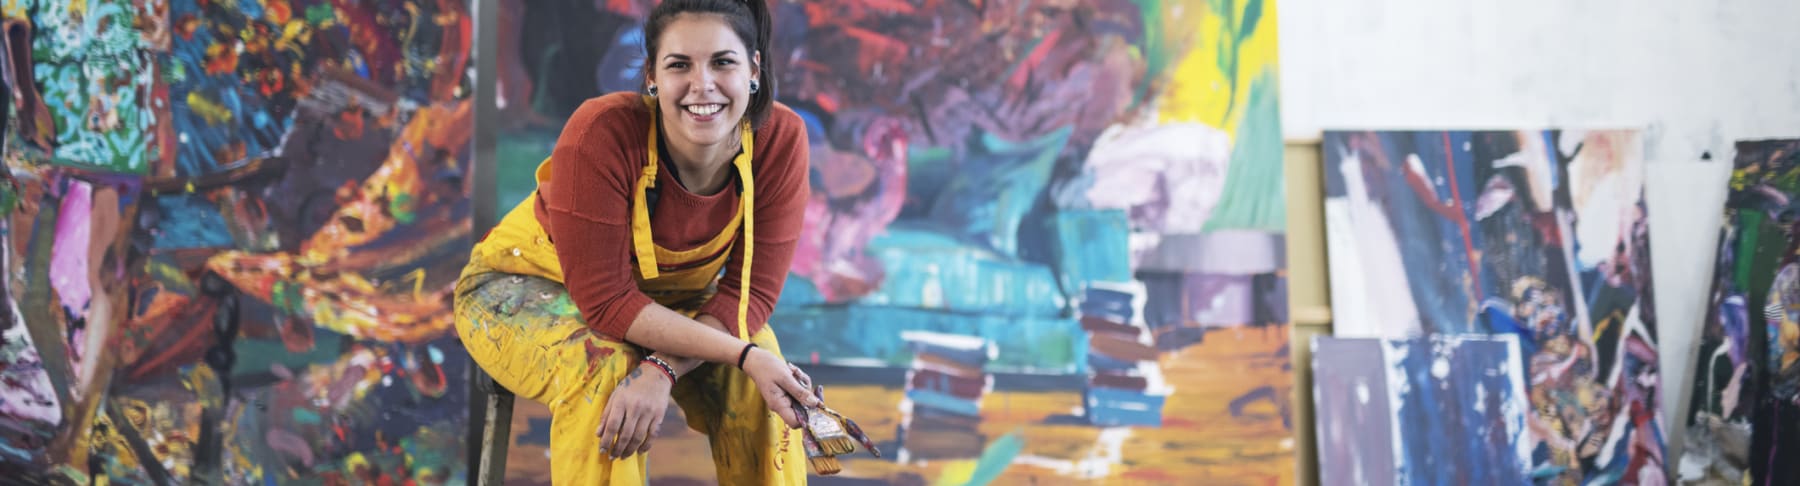 Hispanic artist poses in front of paintings.